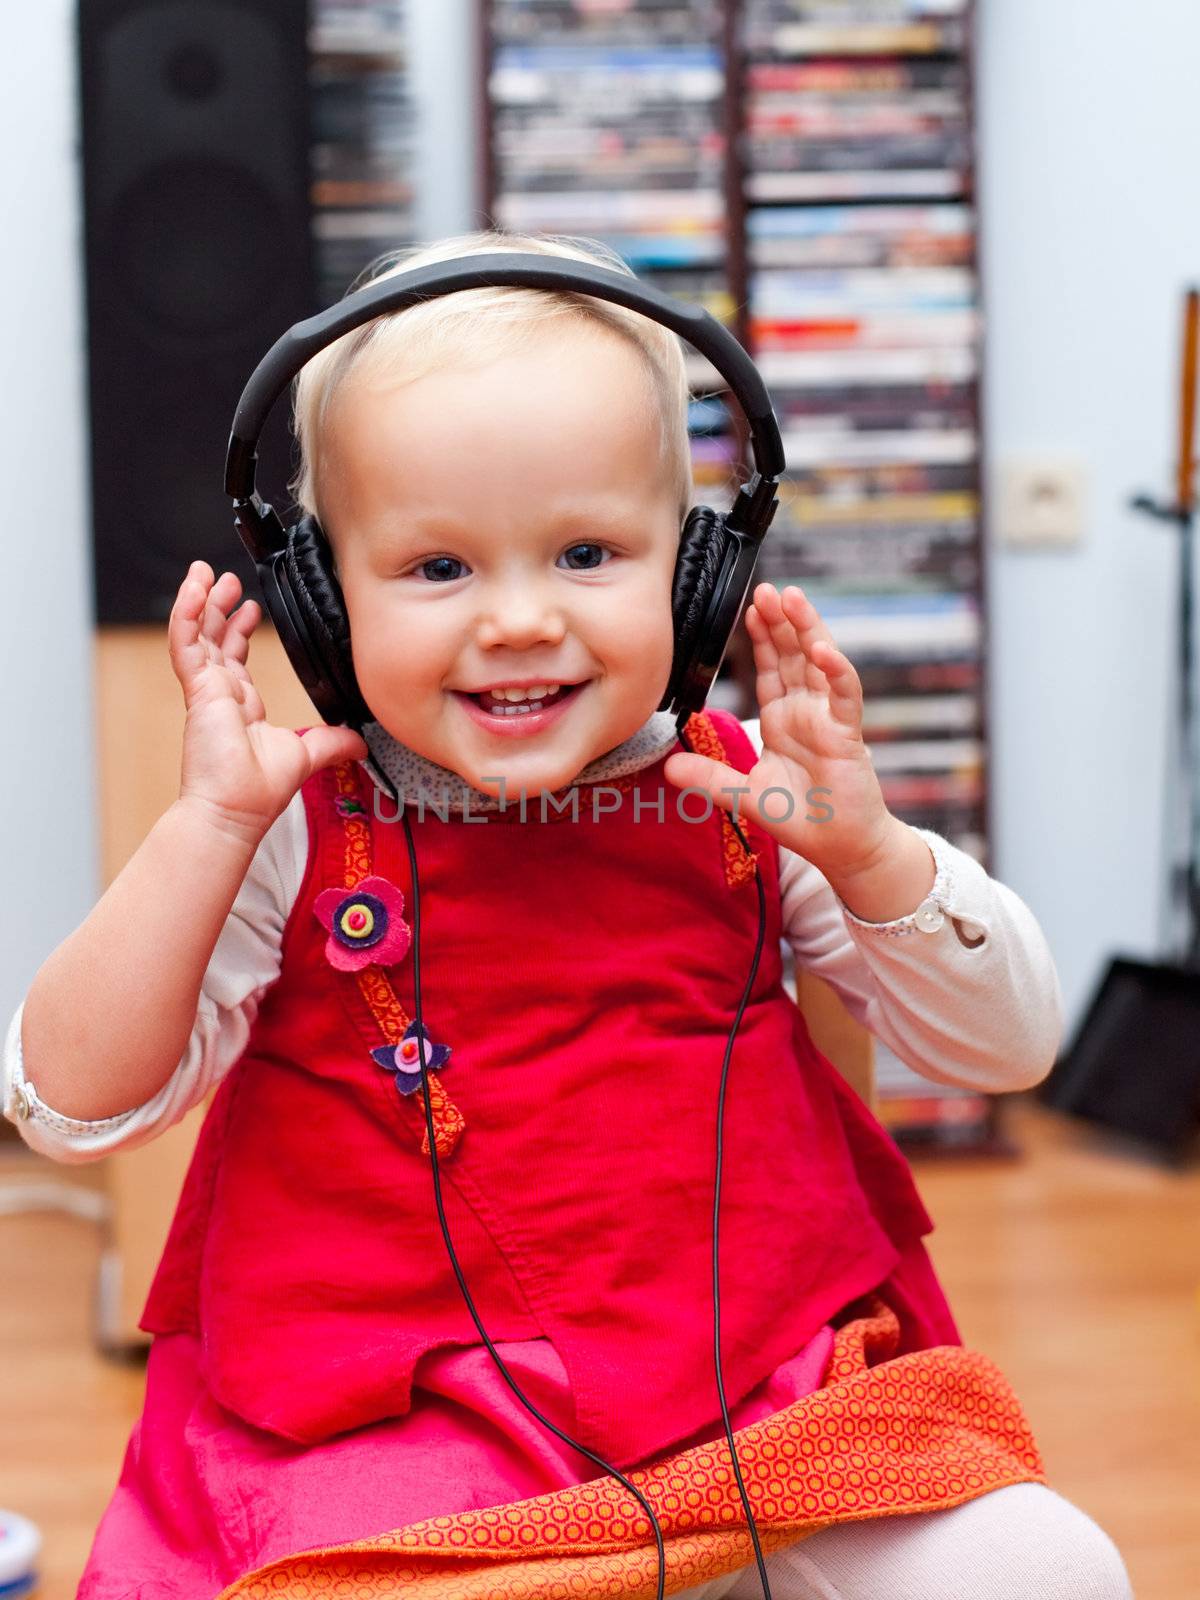 Toddler with headphones by naumoid